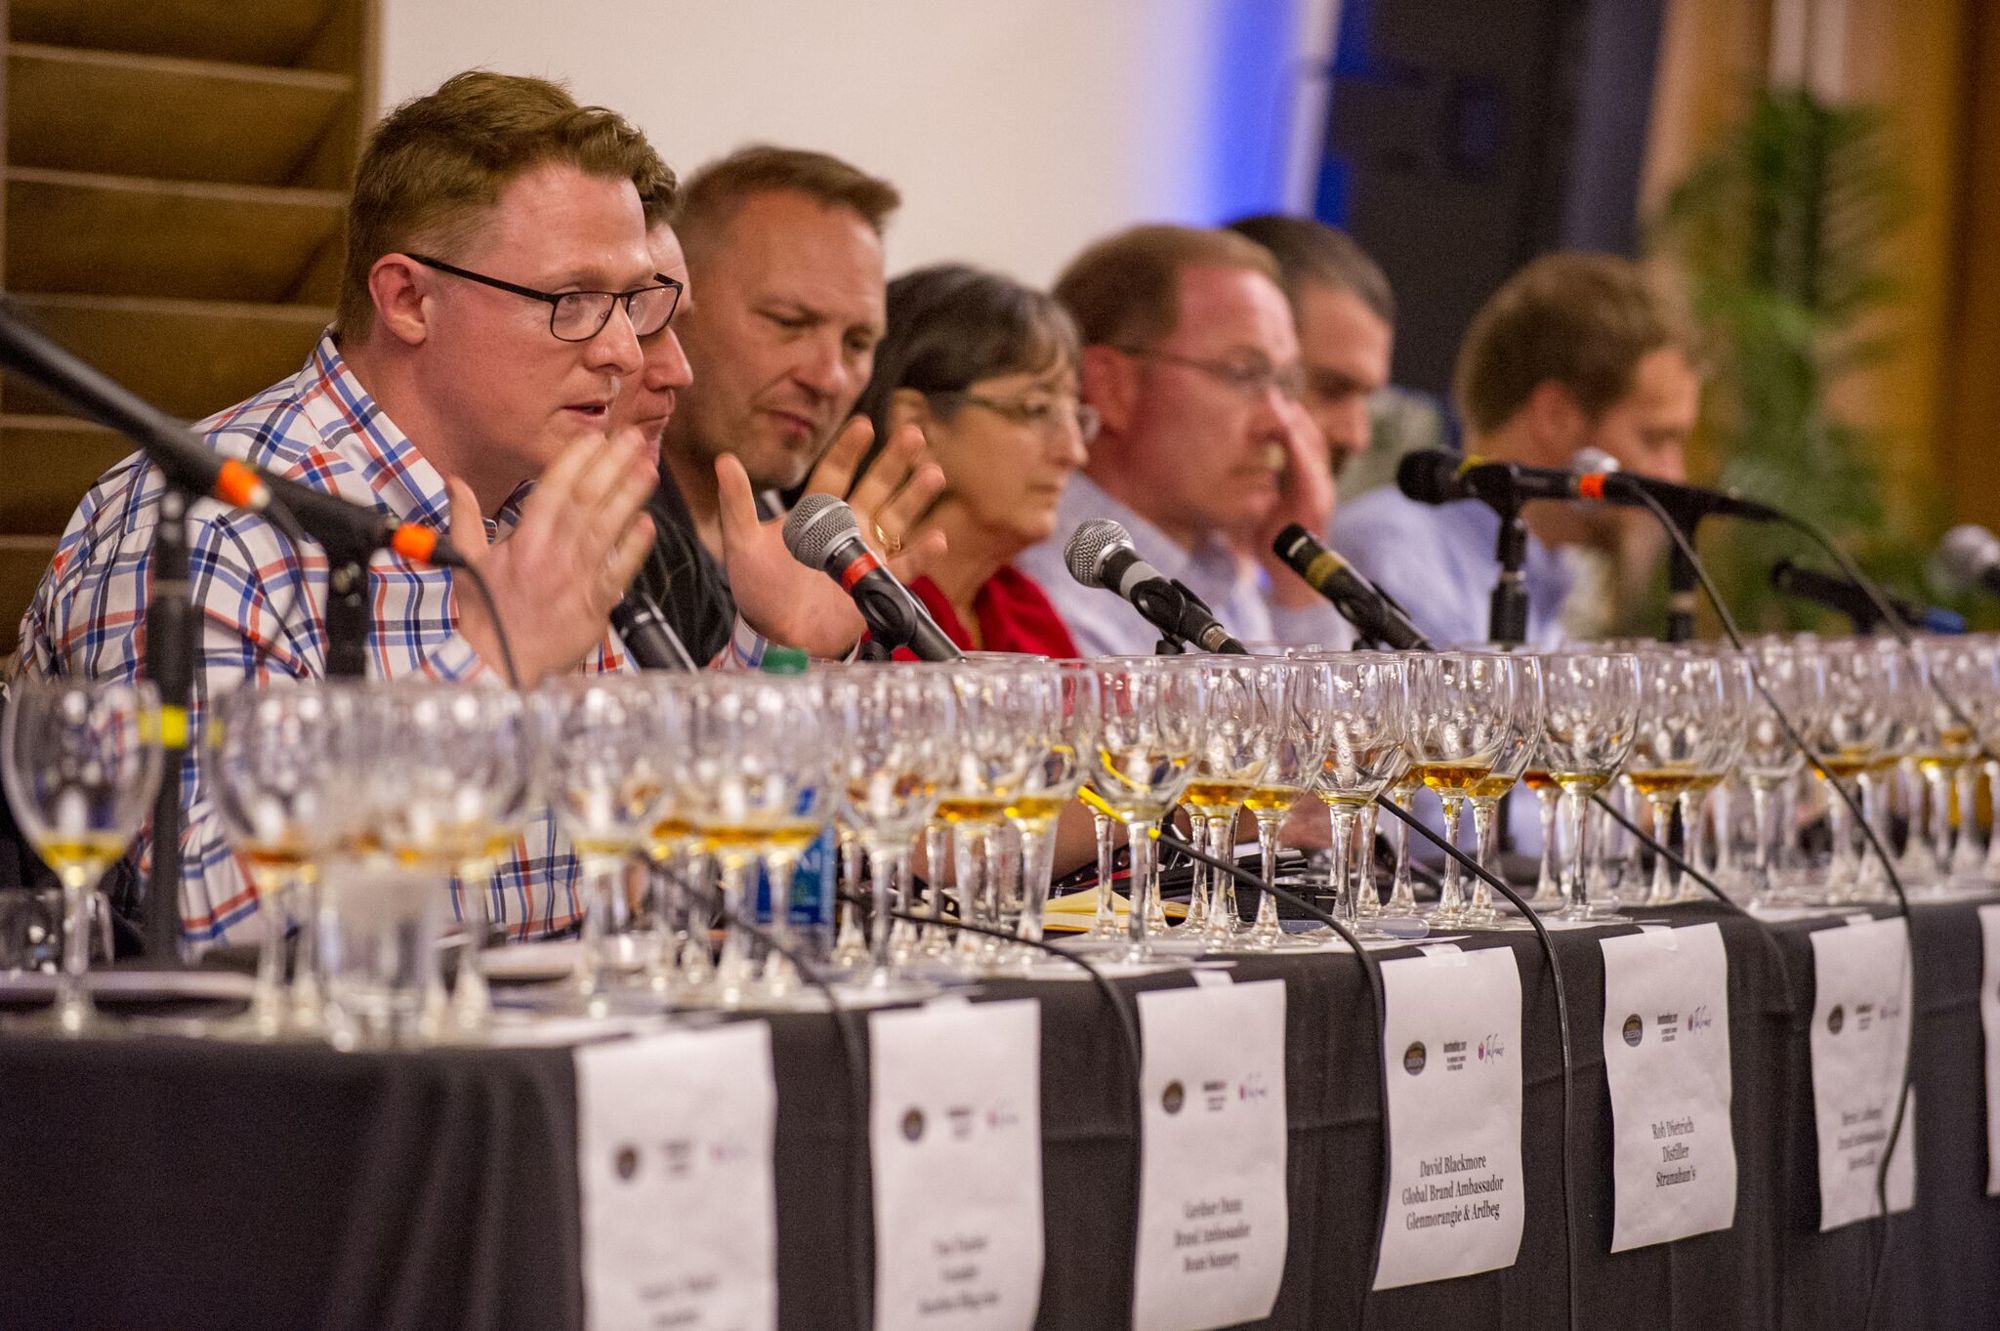 The 2016 Panel of Whiskey Experts discuss the beverage at Whiskey Obsession Festival. Courtesy photo